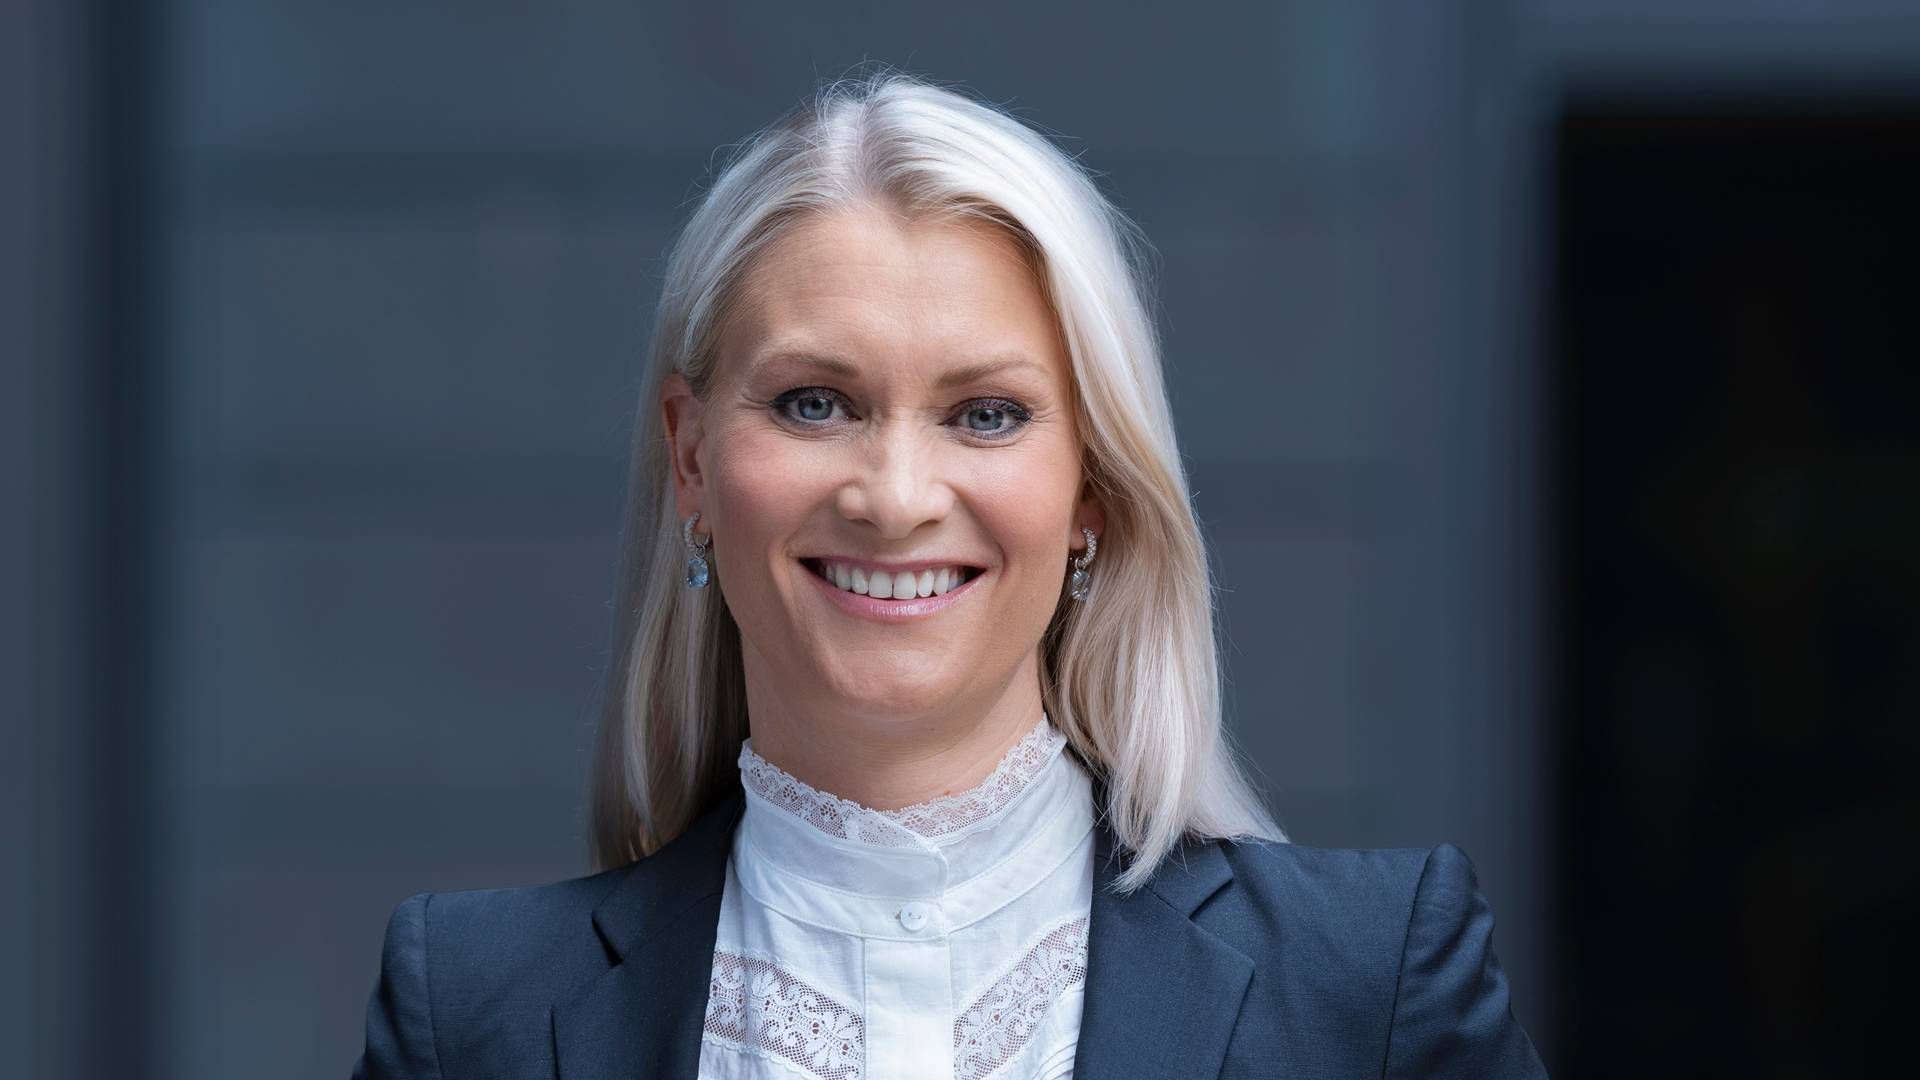 Mie Holstad, Chief Real Assets Officer at Norges Bank Investment Management. | Photo: NBIM / PR